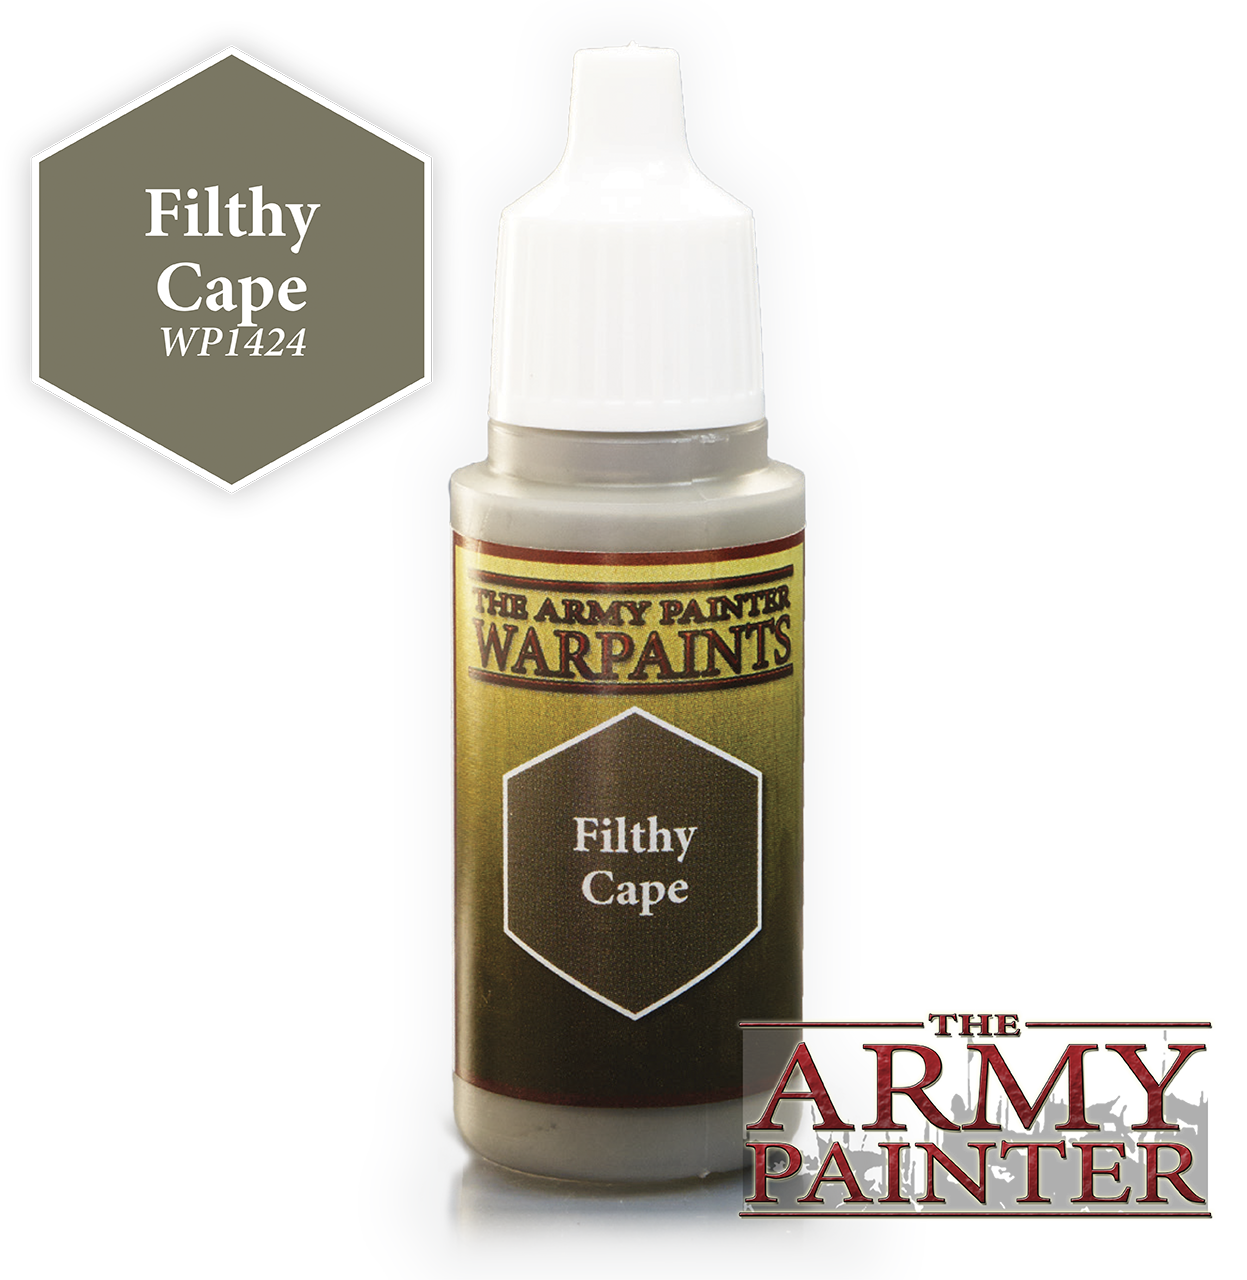 The ARMY PAINTER: Acrylics Warpaint - Filthy Cape | Tacoma Games